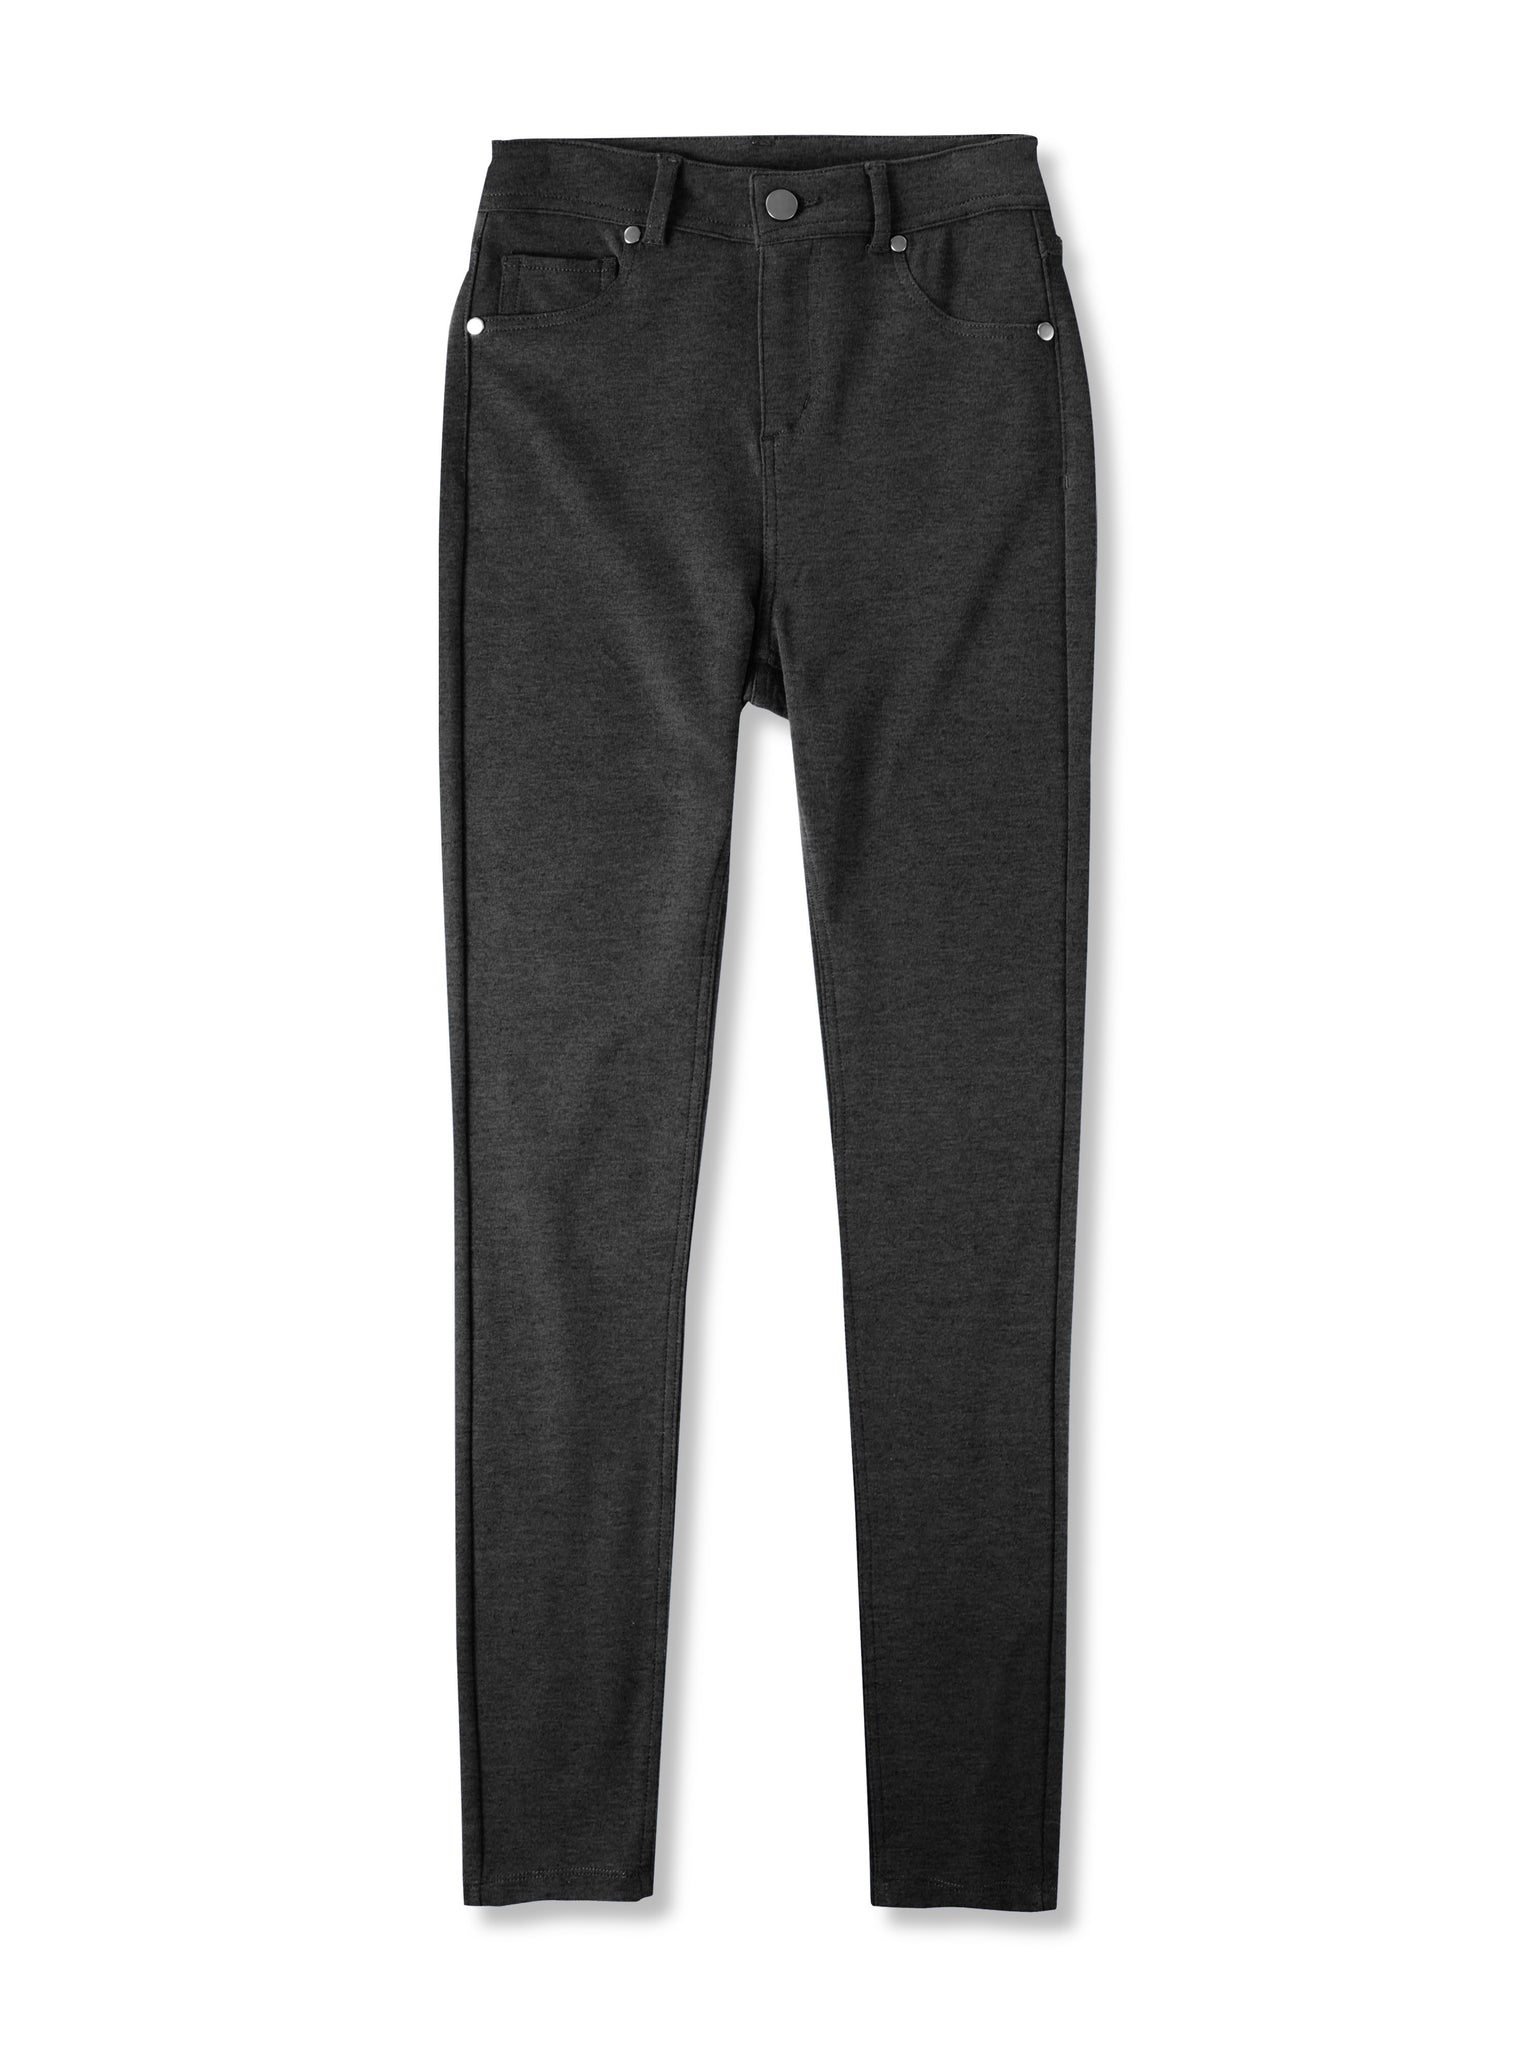 Charcoal grey jeggings for women Compression pant 2 back pkts